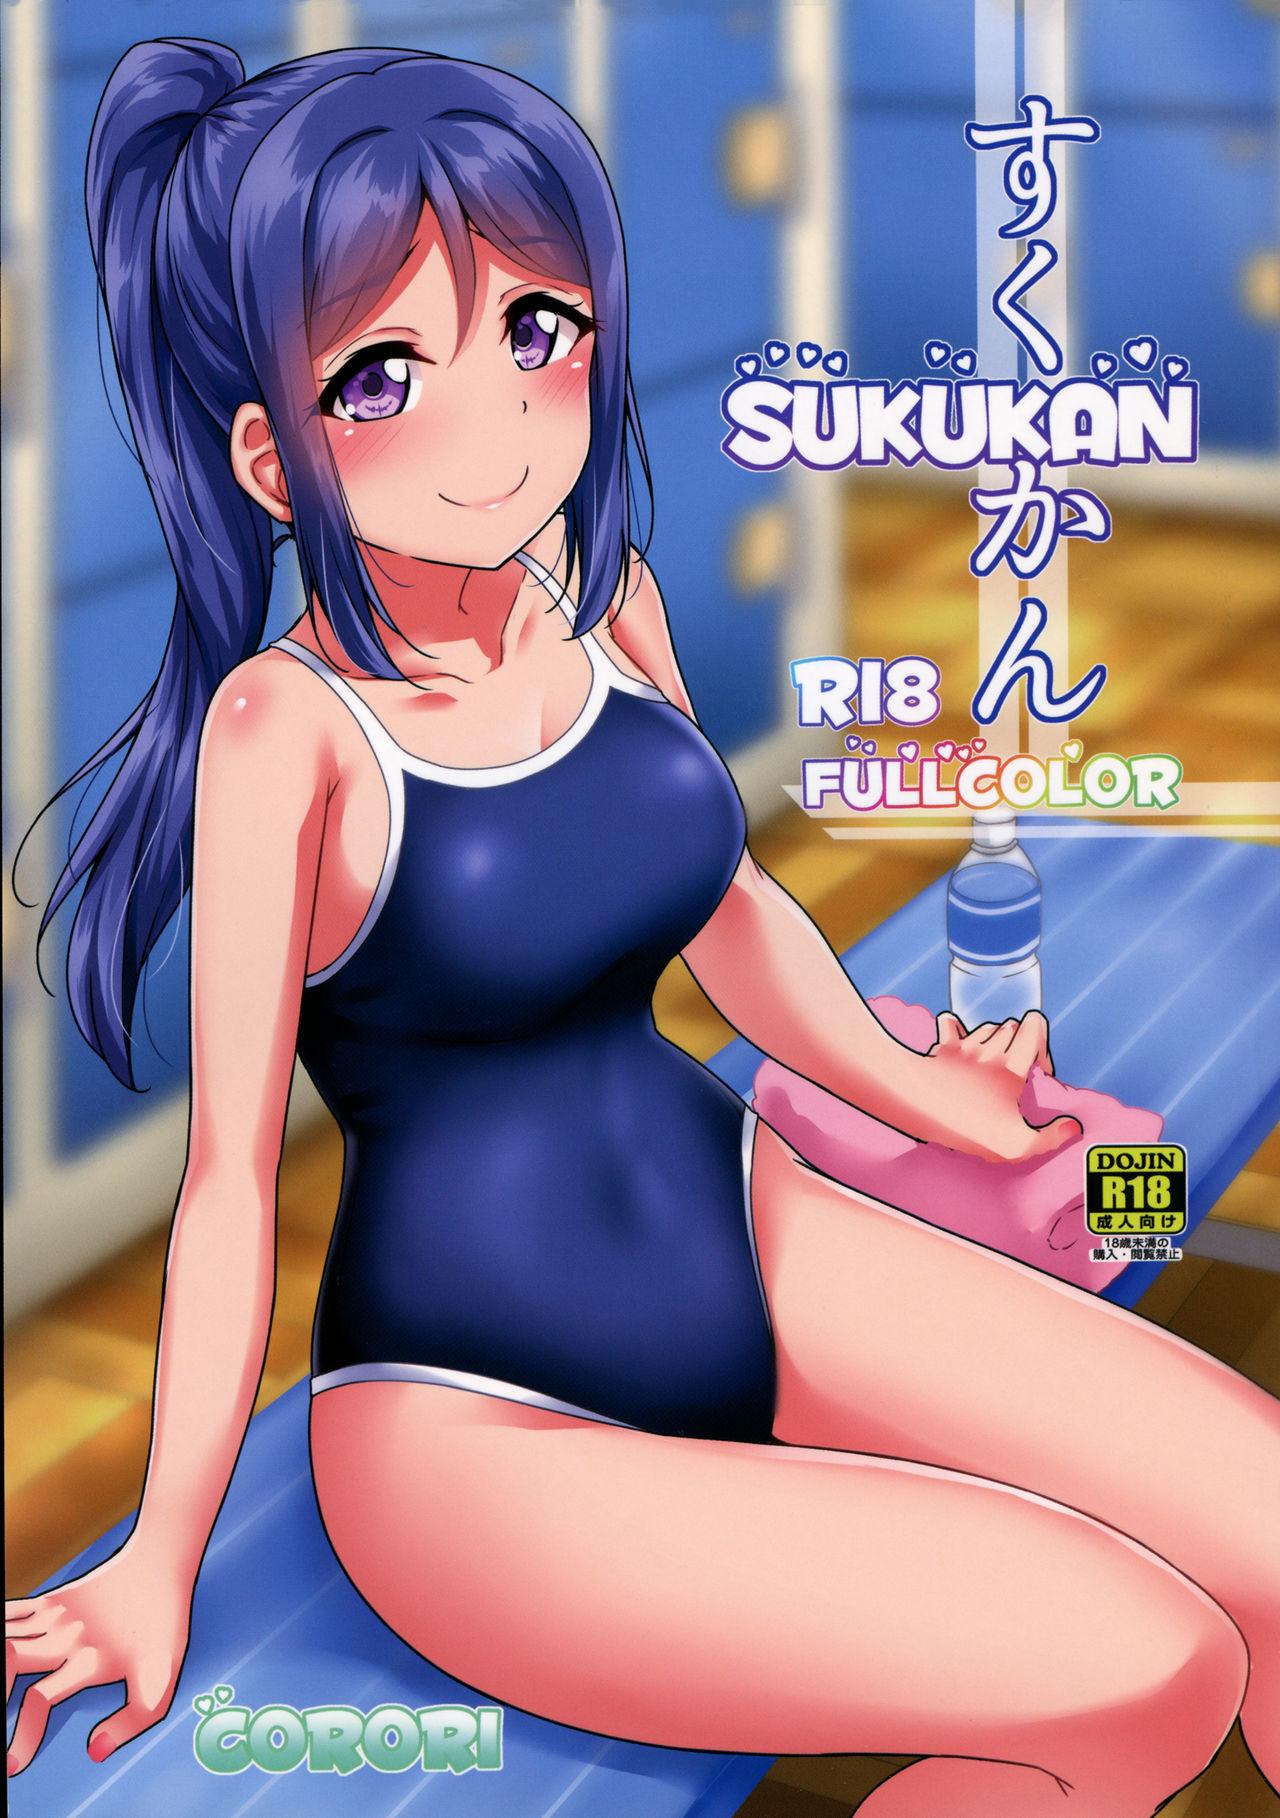 Swing SUKUKAN FULLCOLOR - Love live Love live sunshine Hairypussy - Picture 1